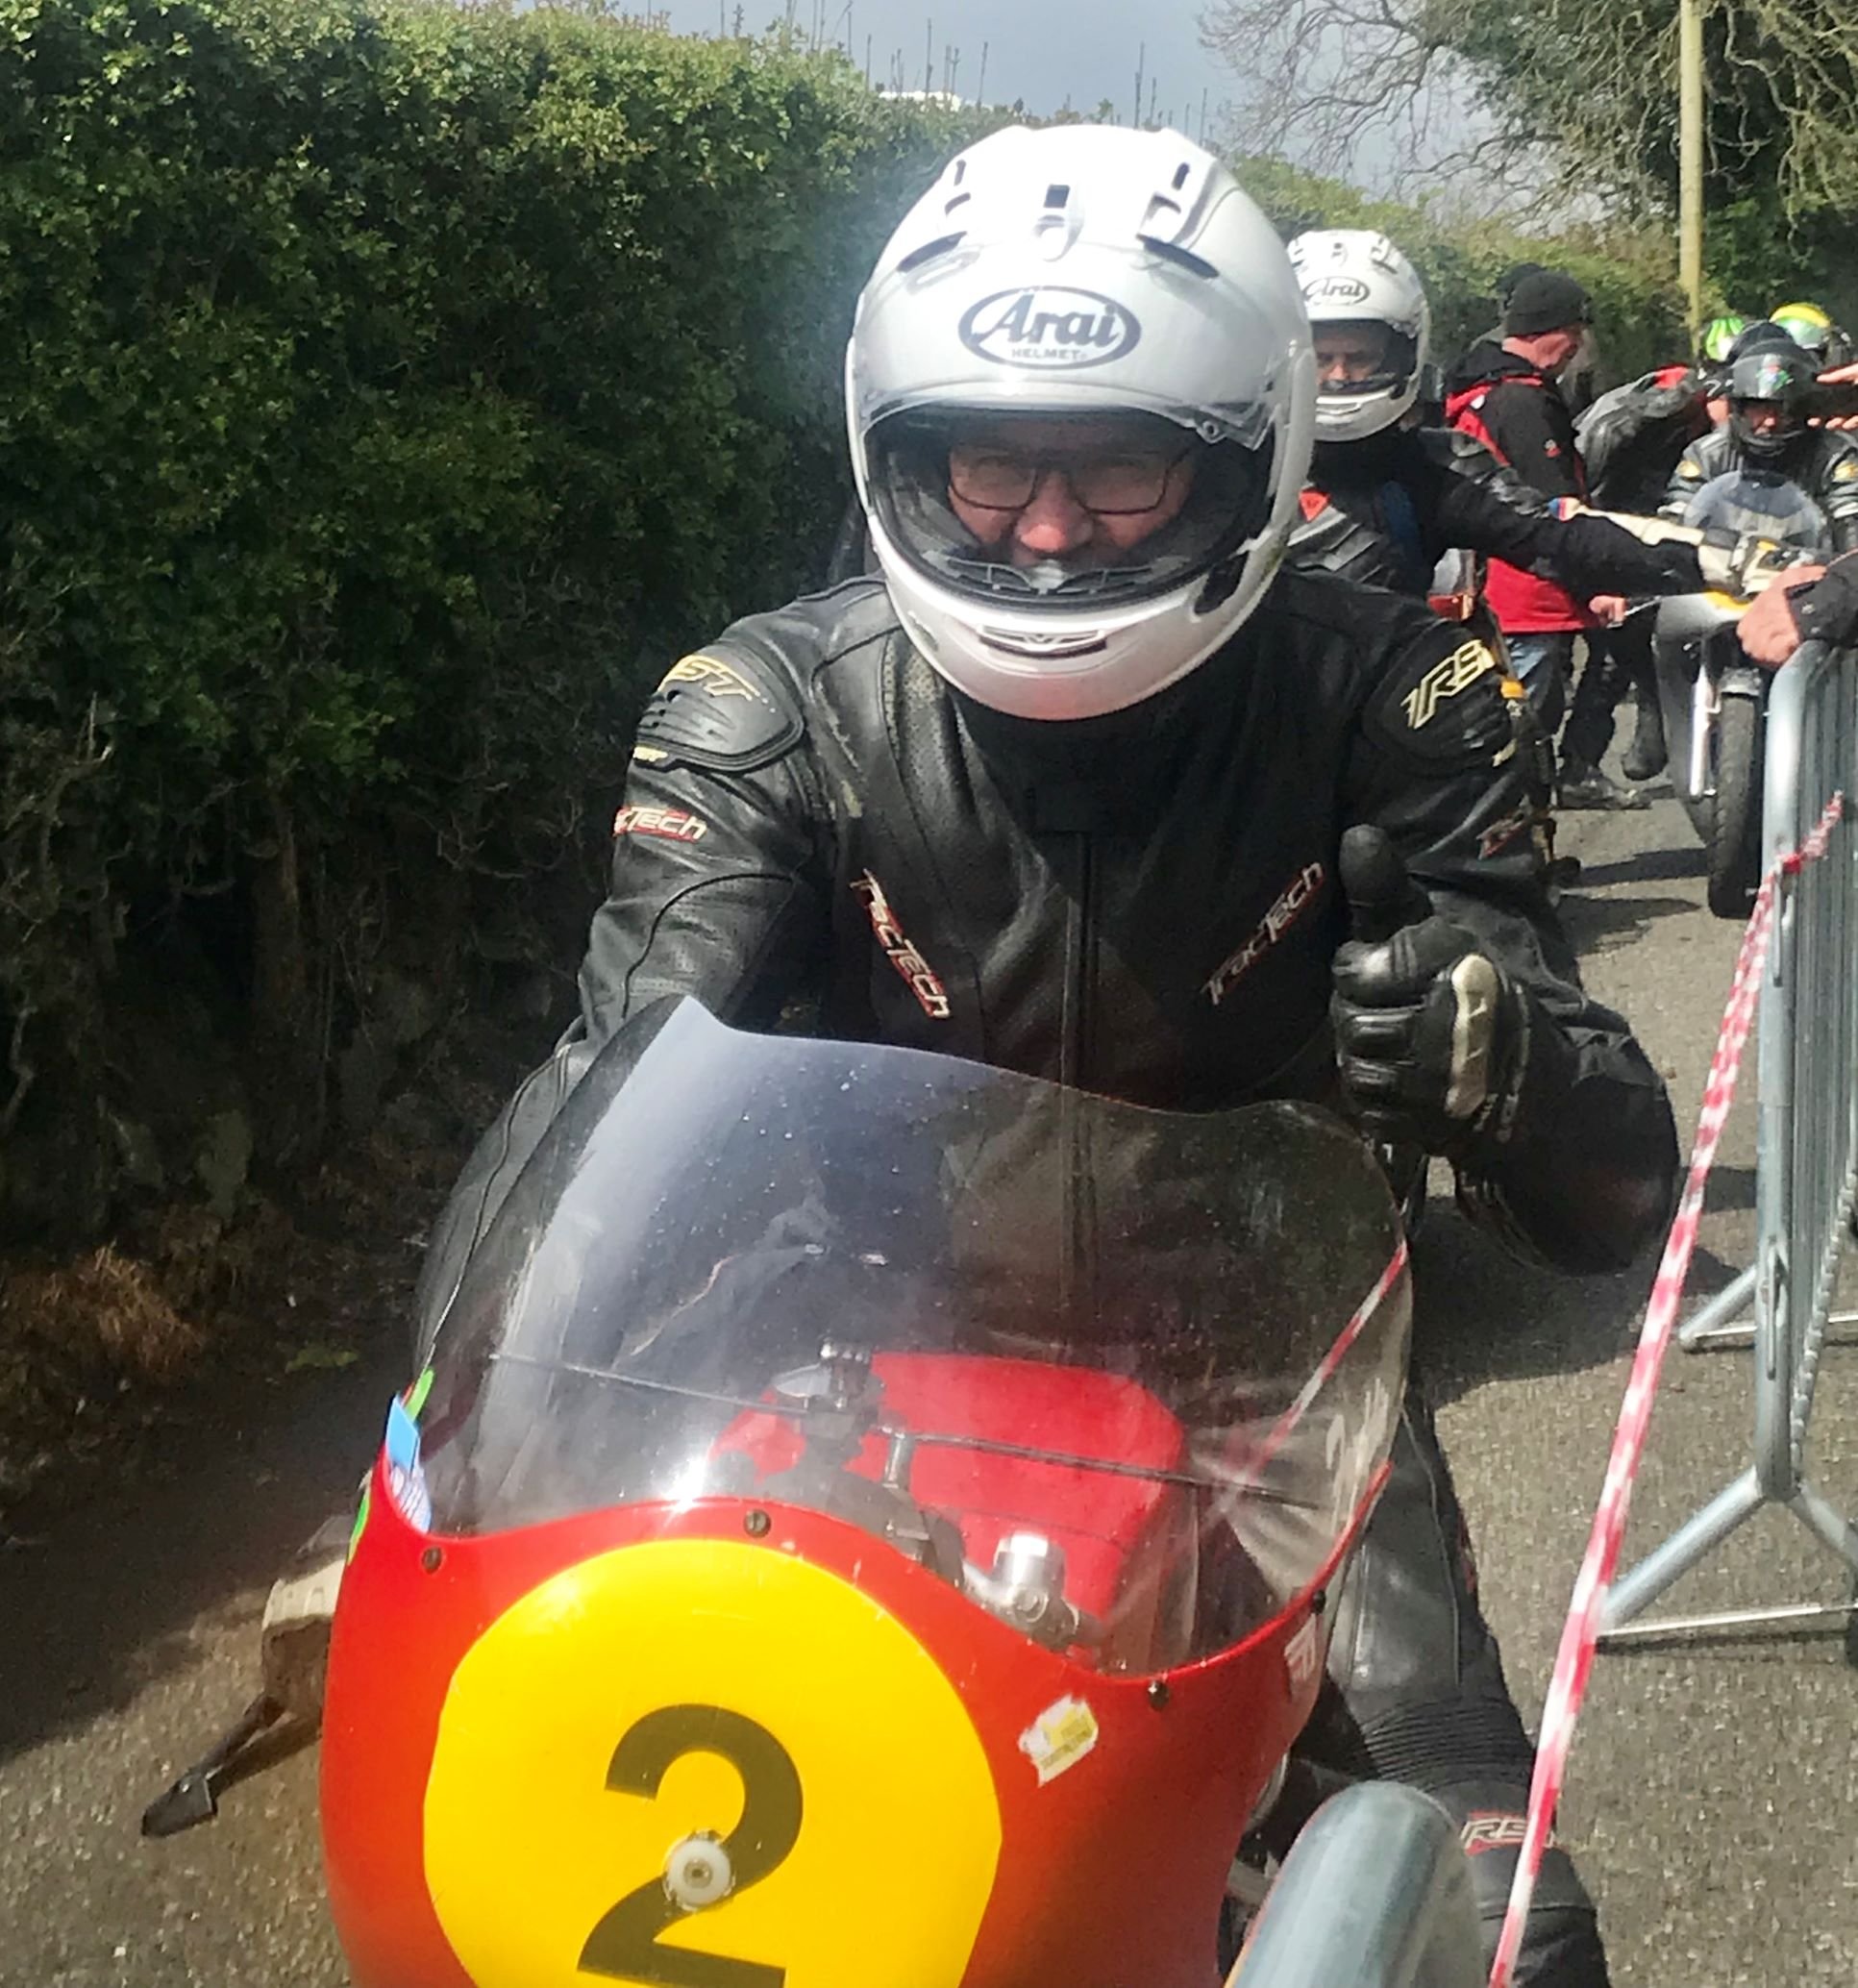 Cookstown 100 Classic Round Up - Copy